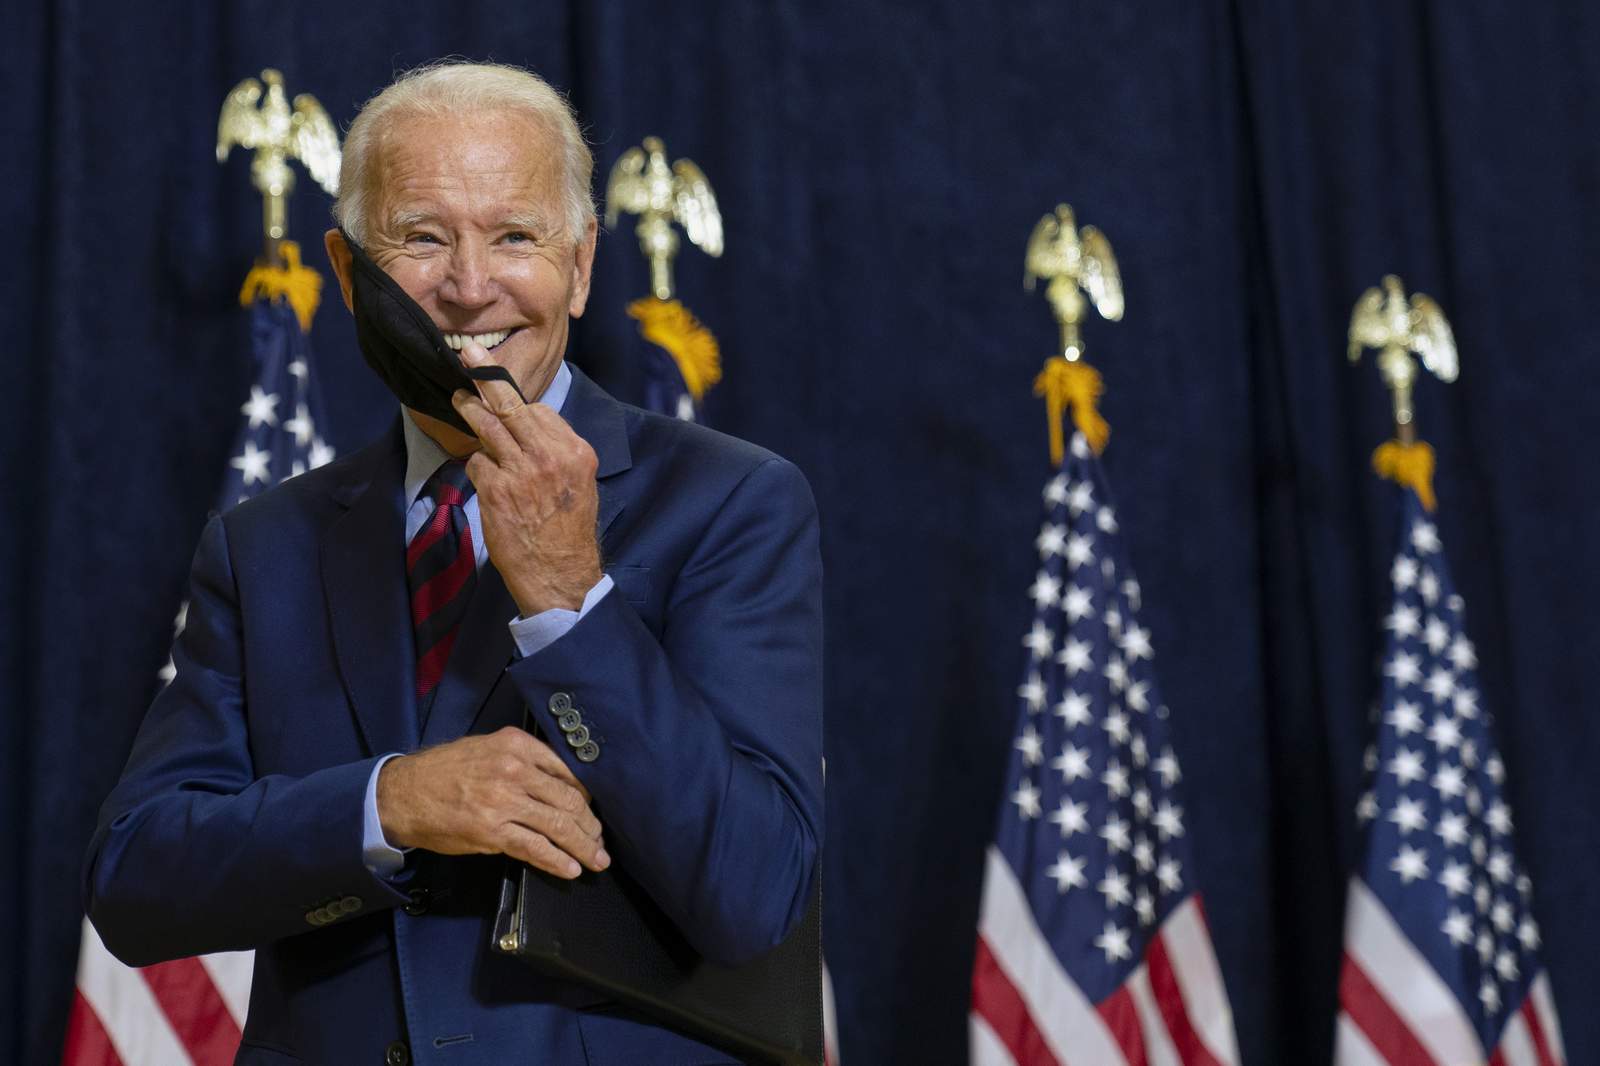 Biden names liberal econ team as pandemic threatens workers